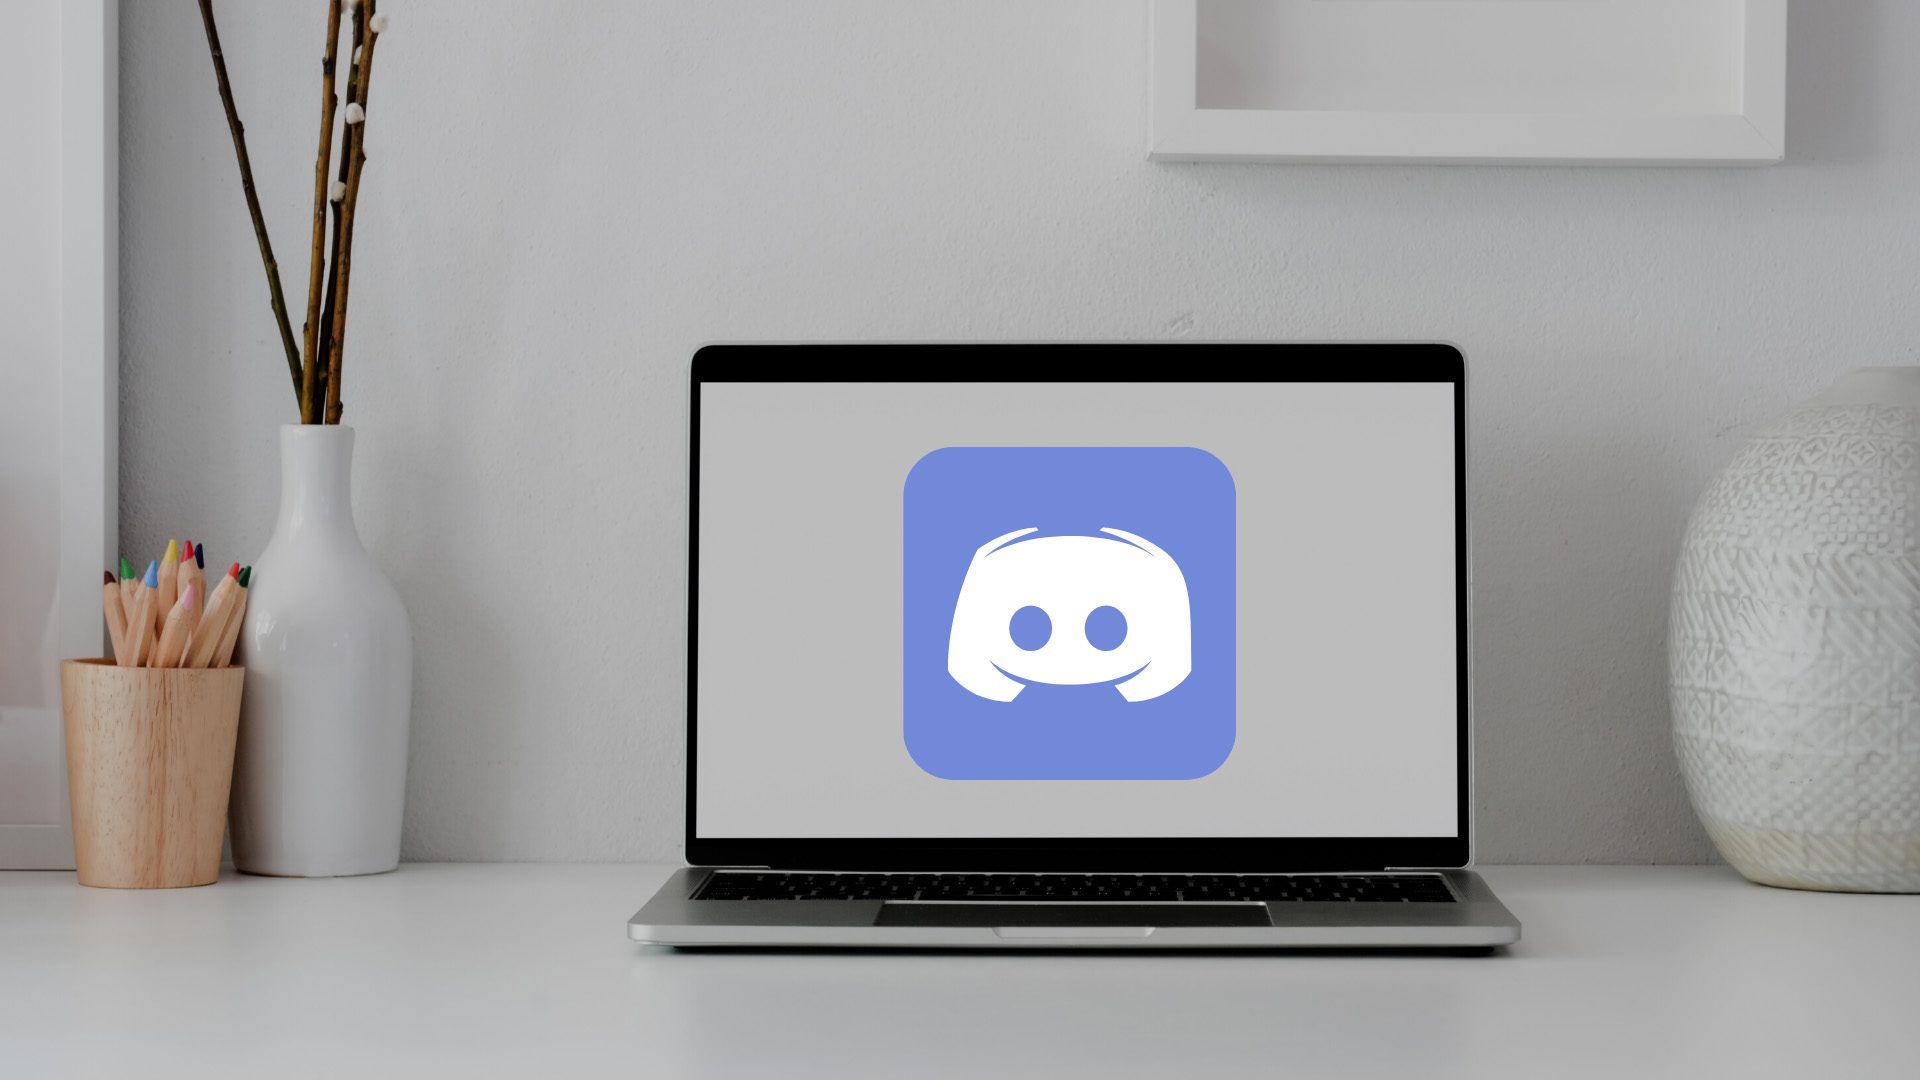 Better Discord not working 2022: How to fix it?